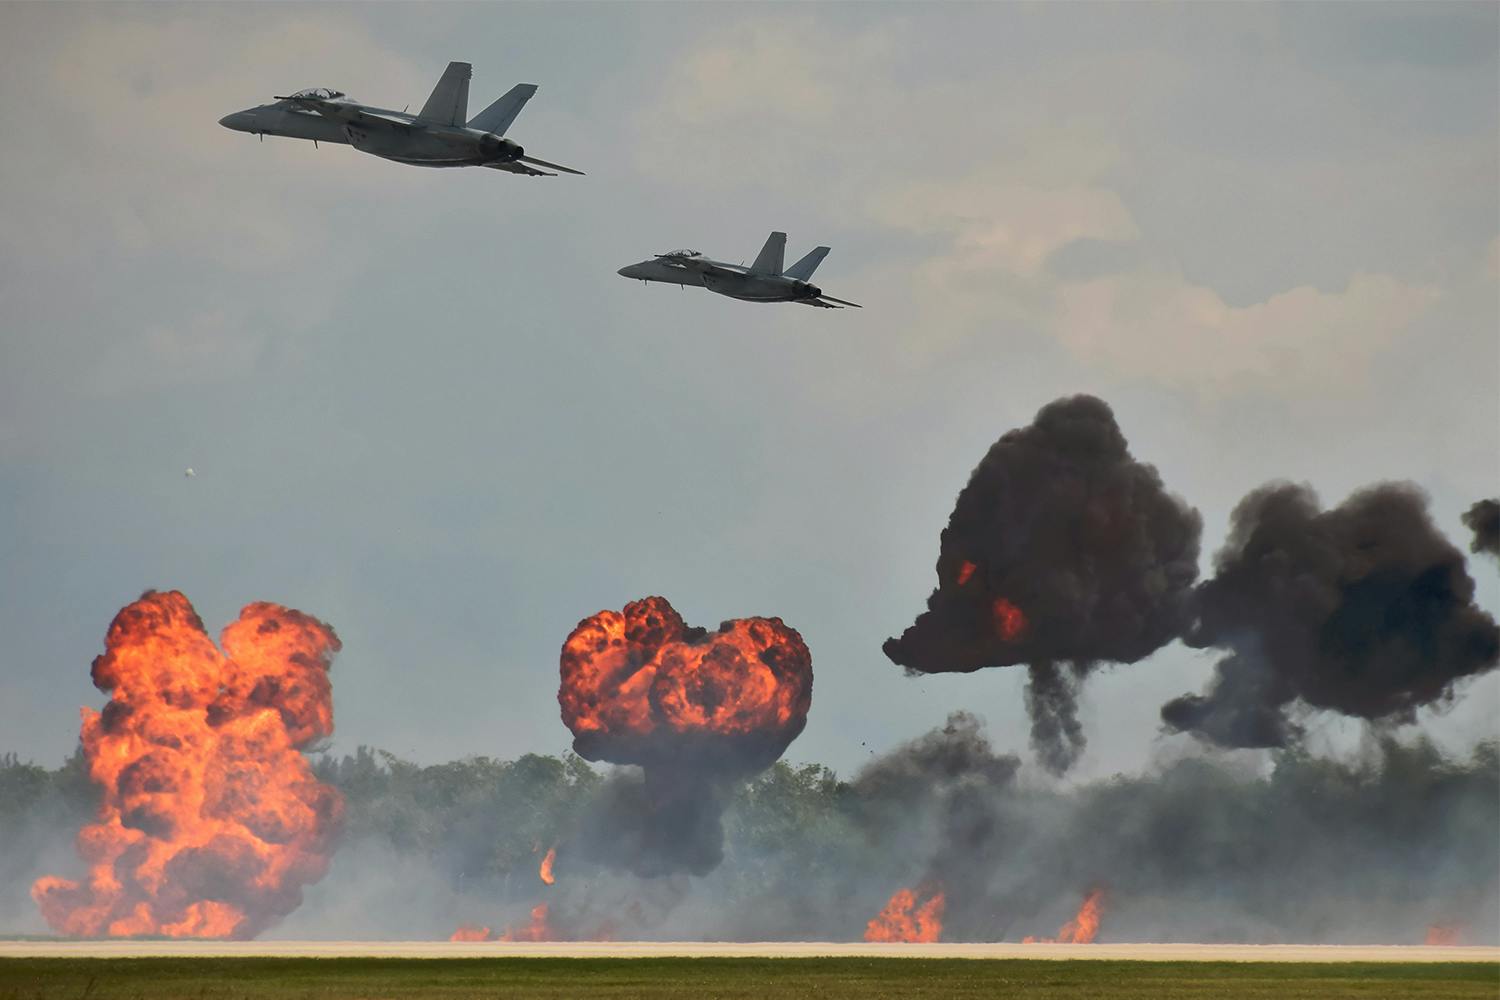 jets fly over ground explosions